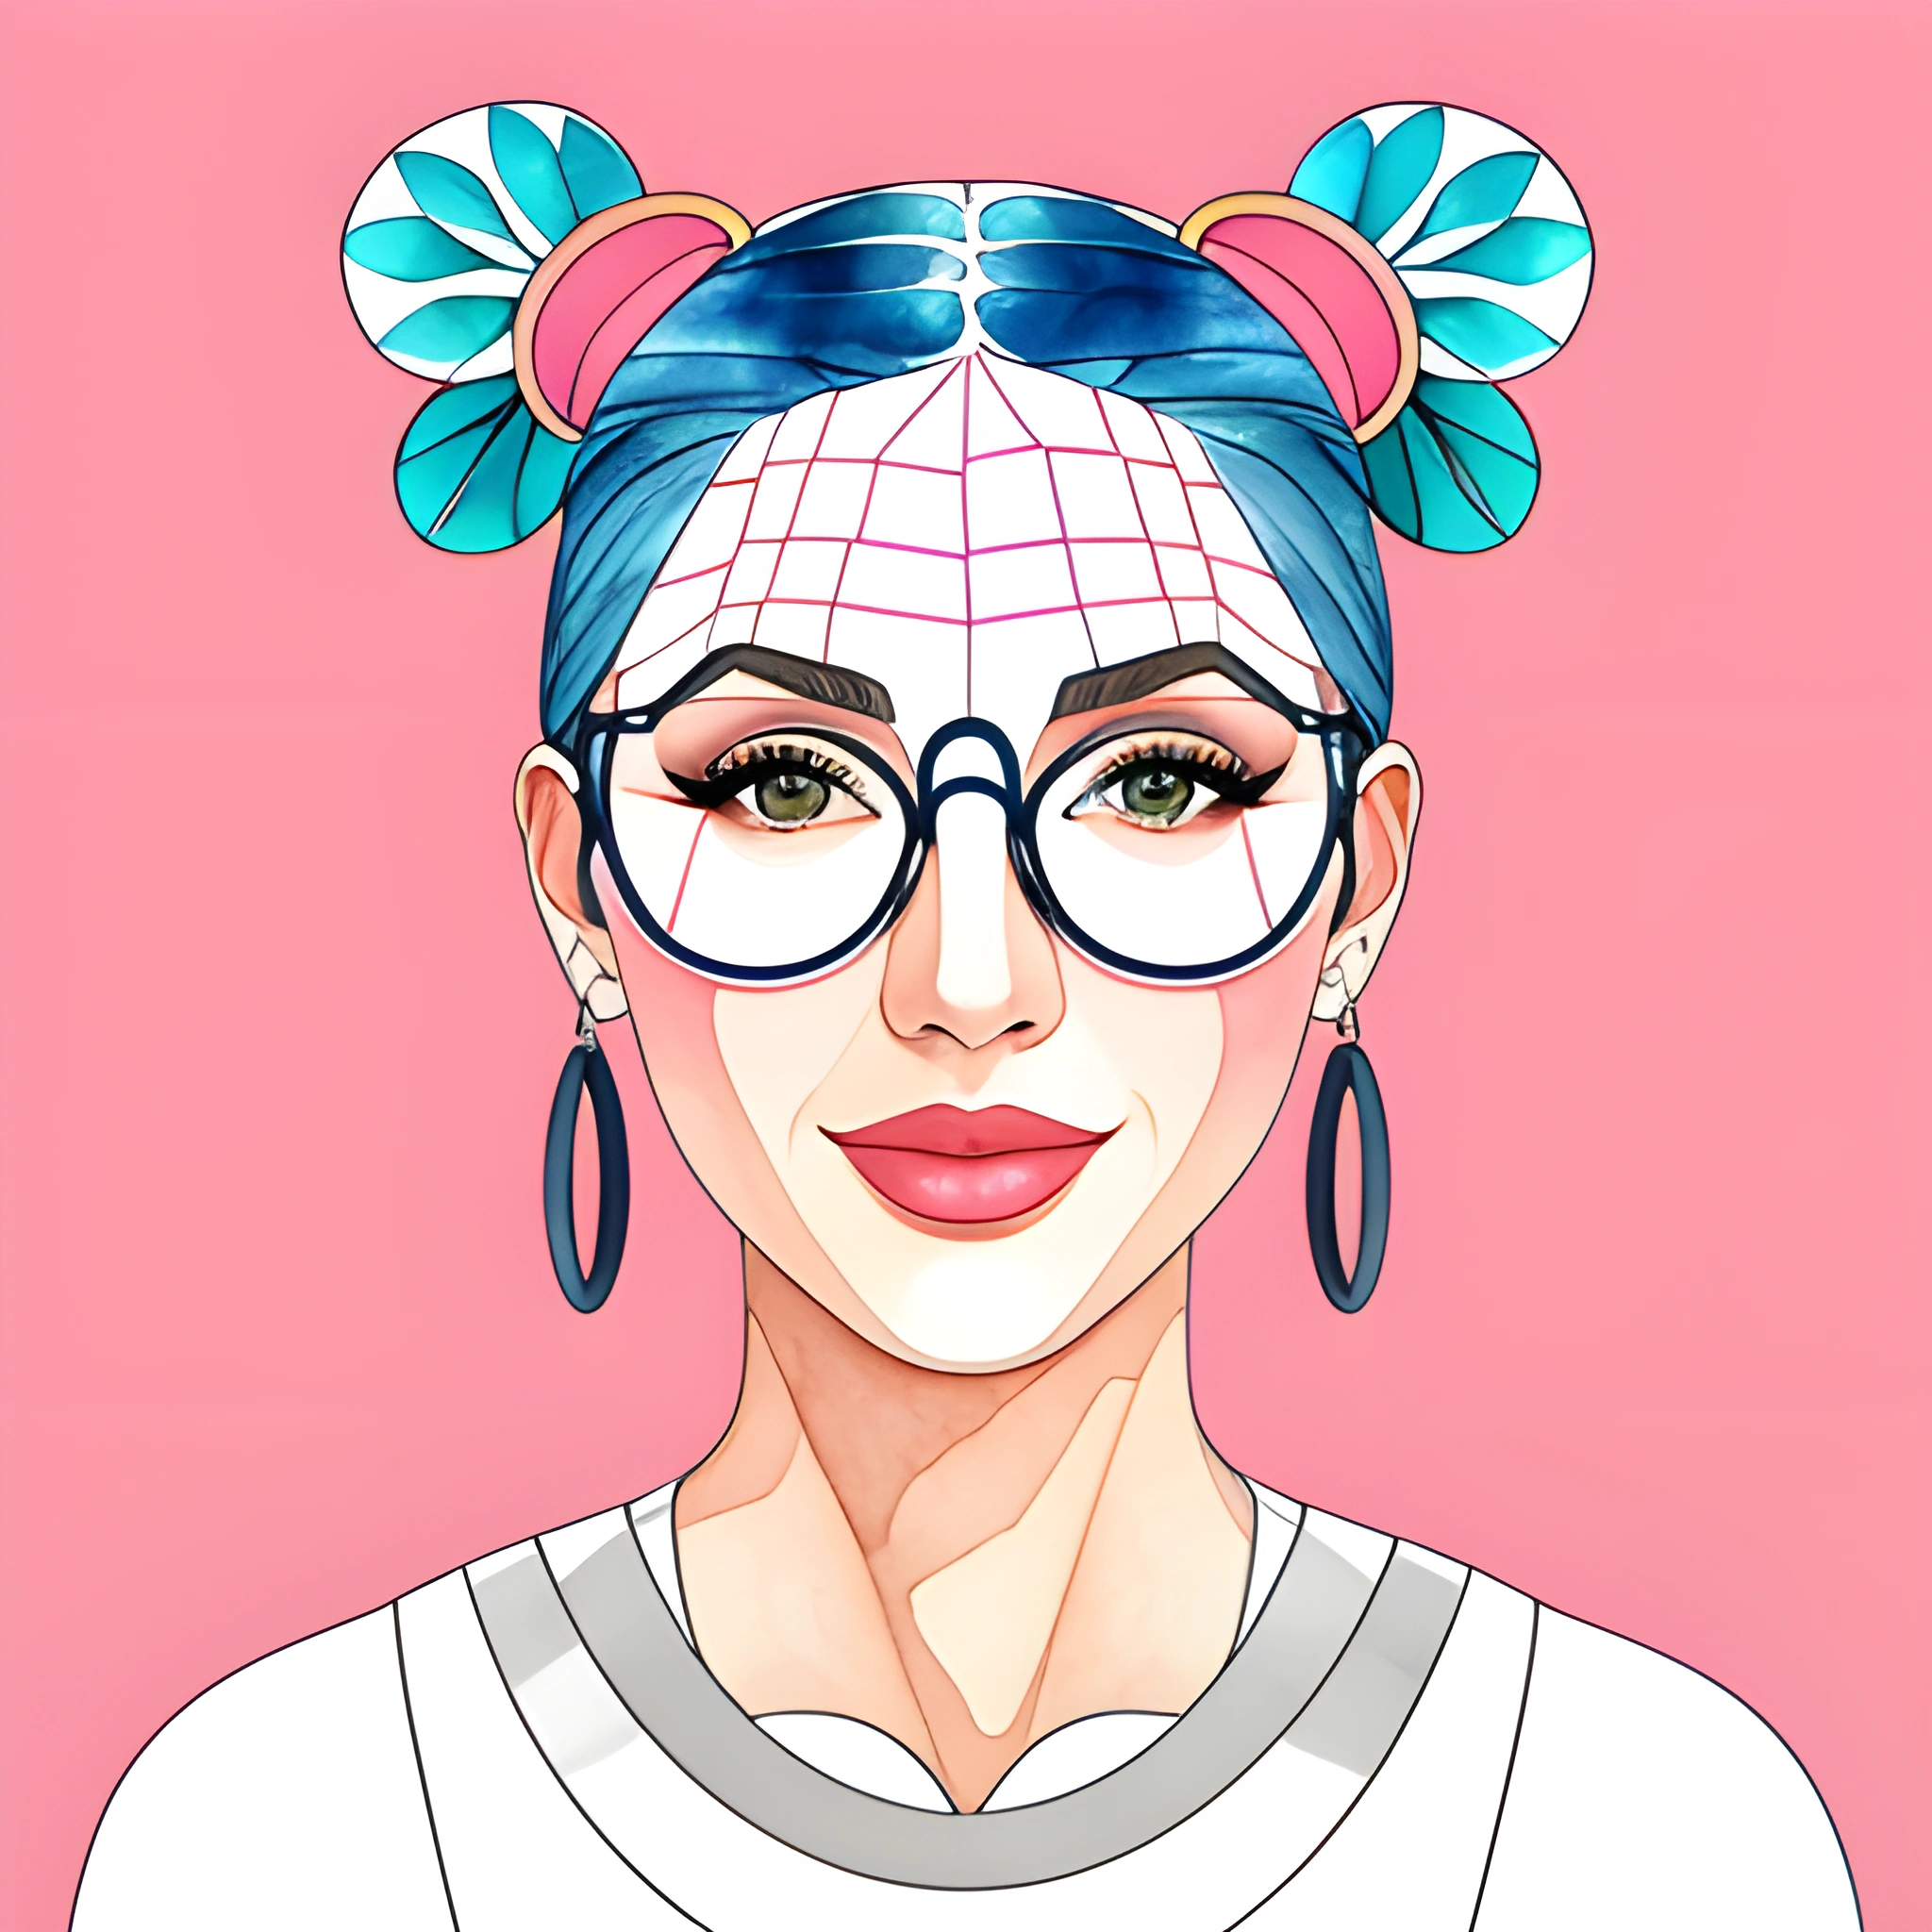 illustration of a woman with glasses and a blue hair